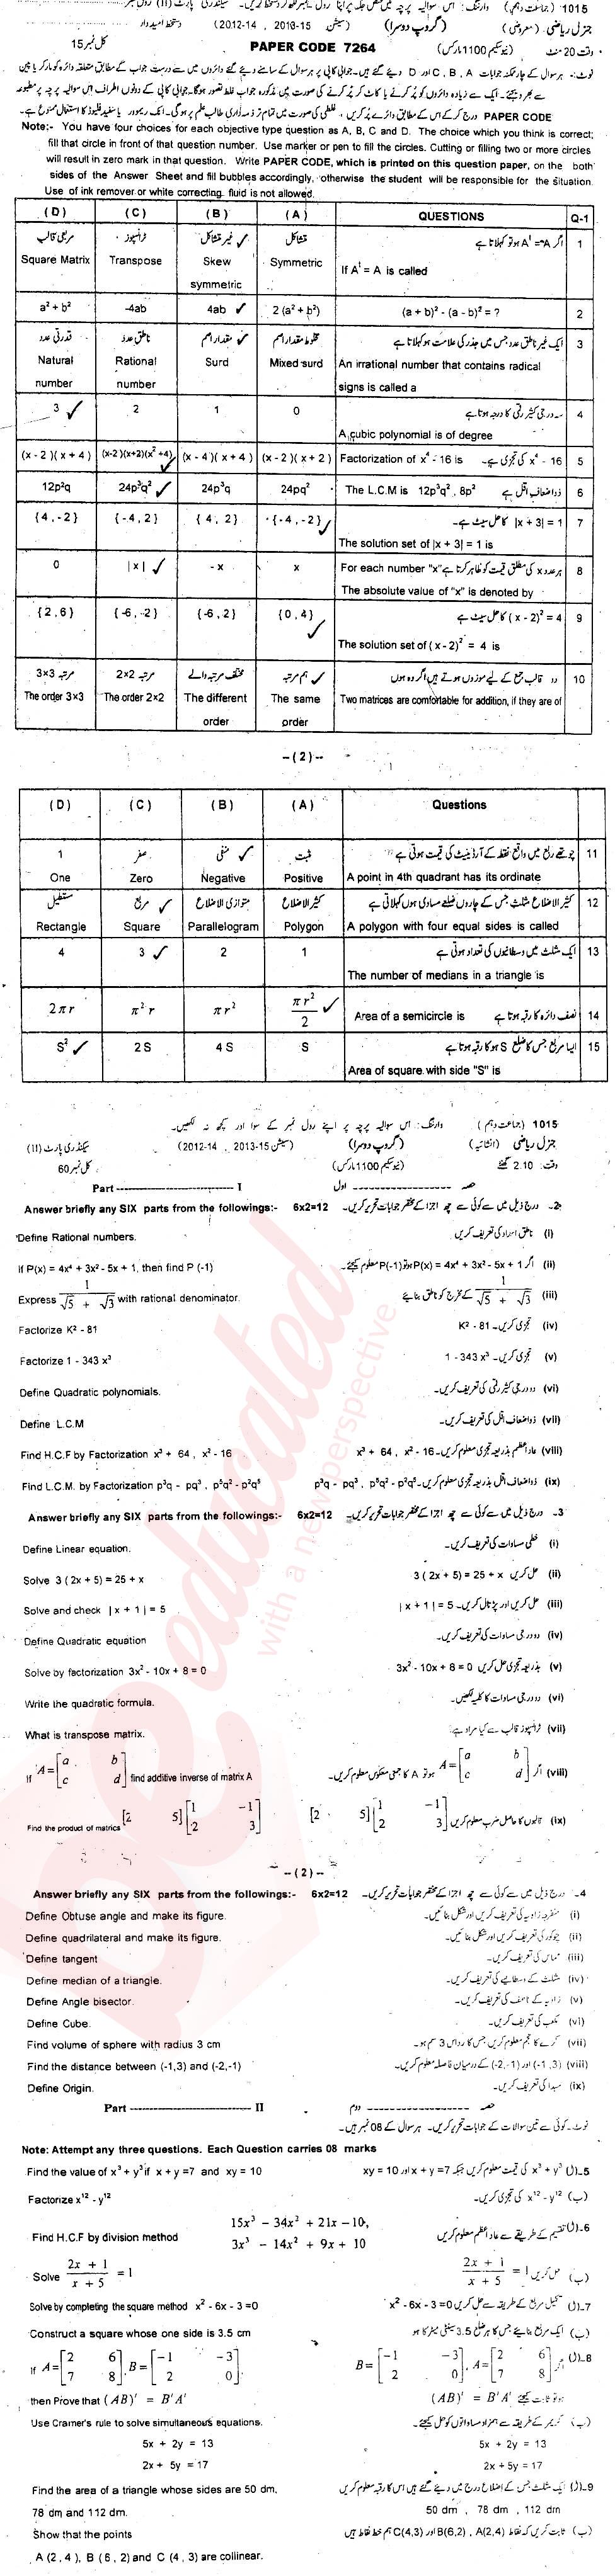 General Math 10th class Past Paper Group 2 BISE Sargodha 2015